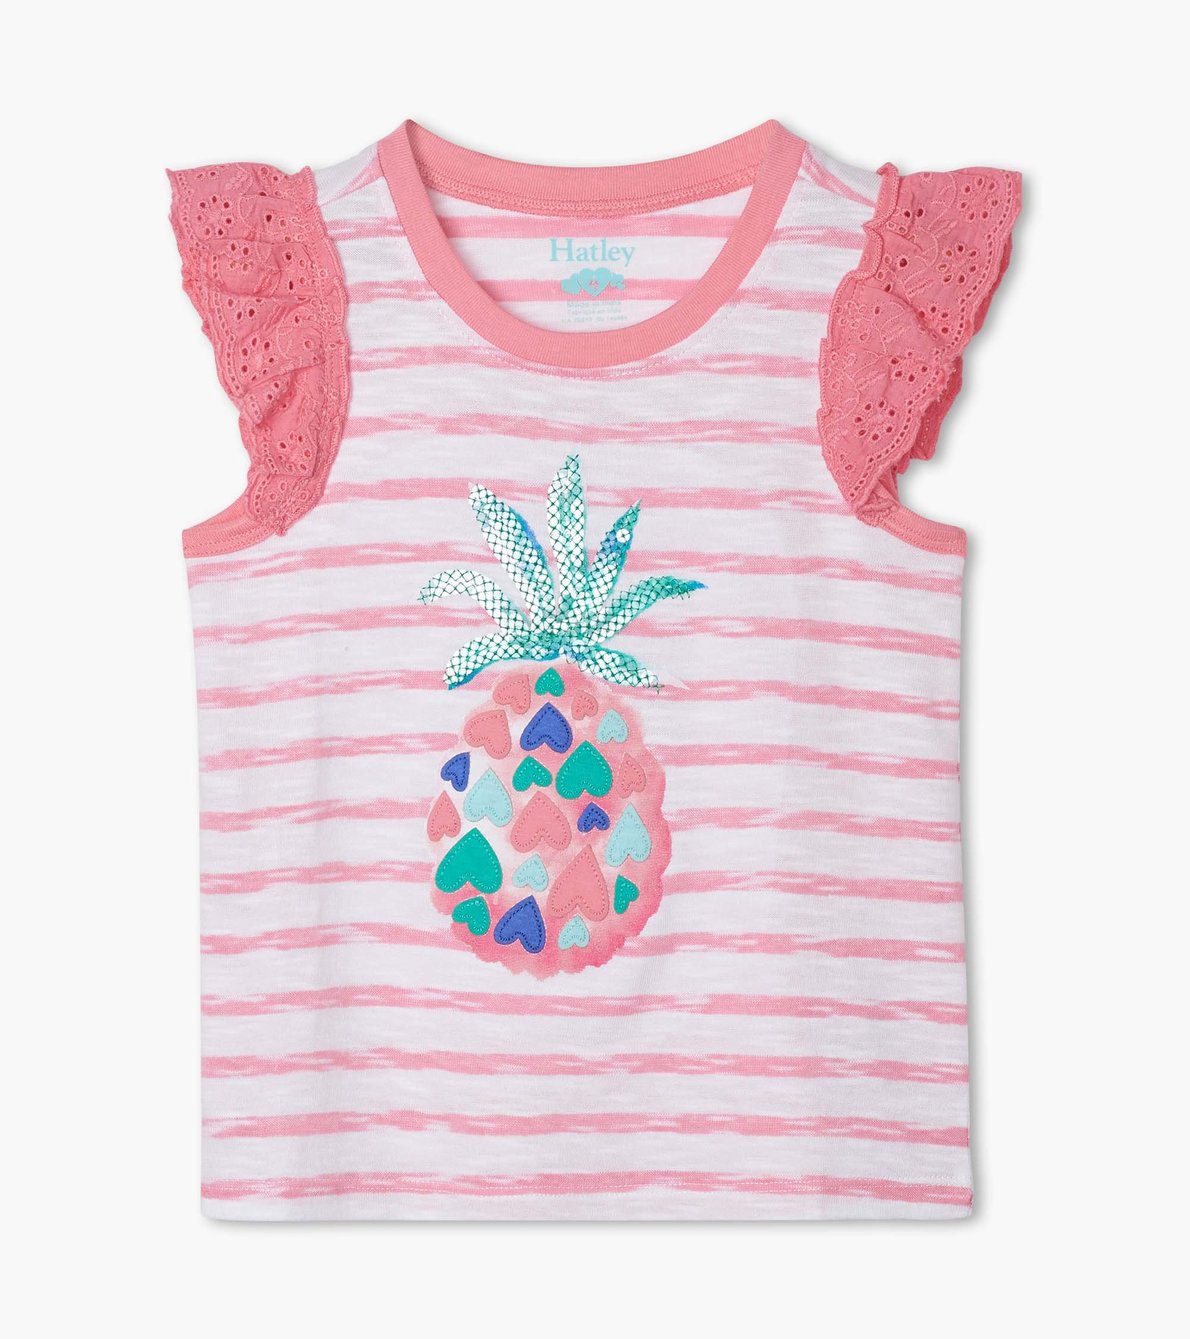 View larger image of Pineapple Hearts Eyelet Trim Tank Top